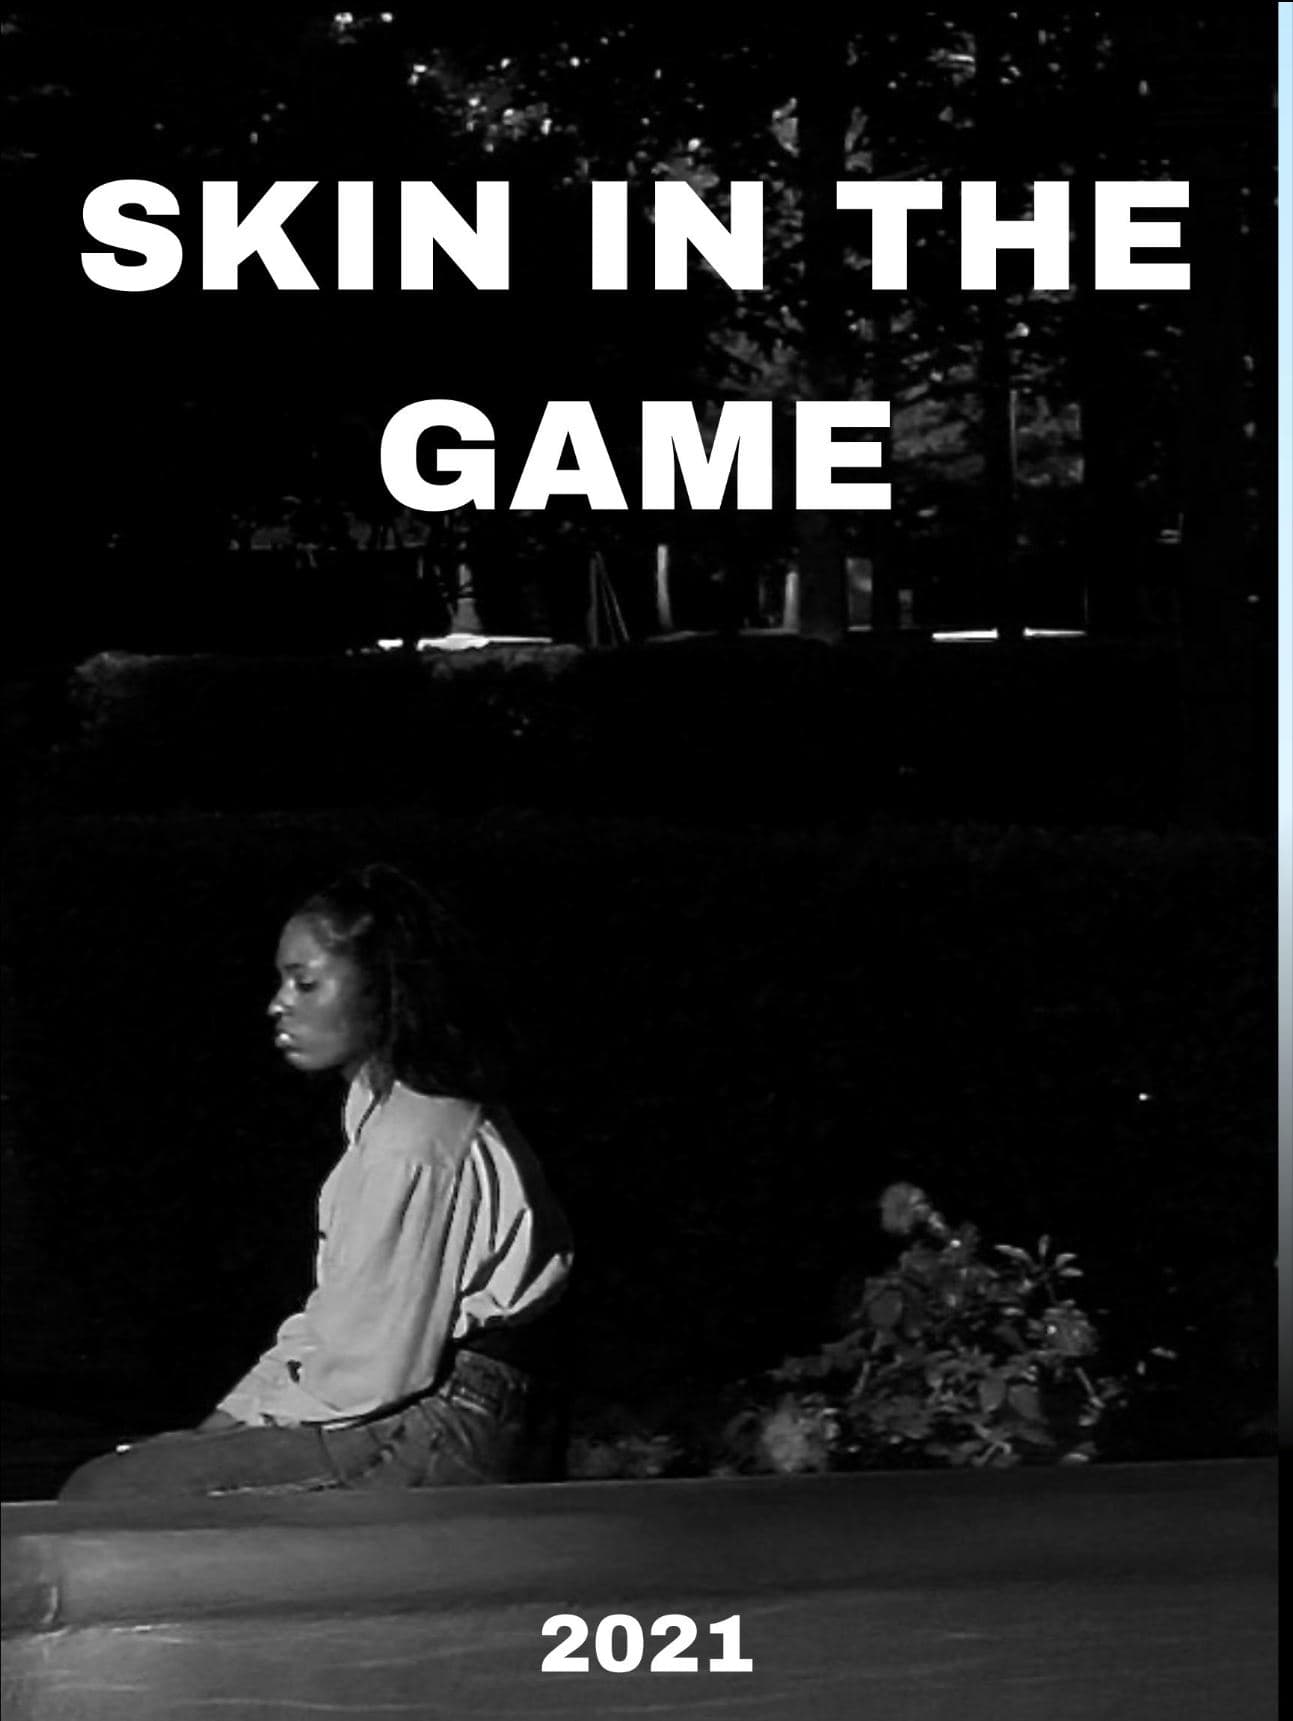 Skin in the Game